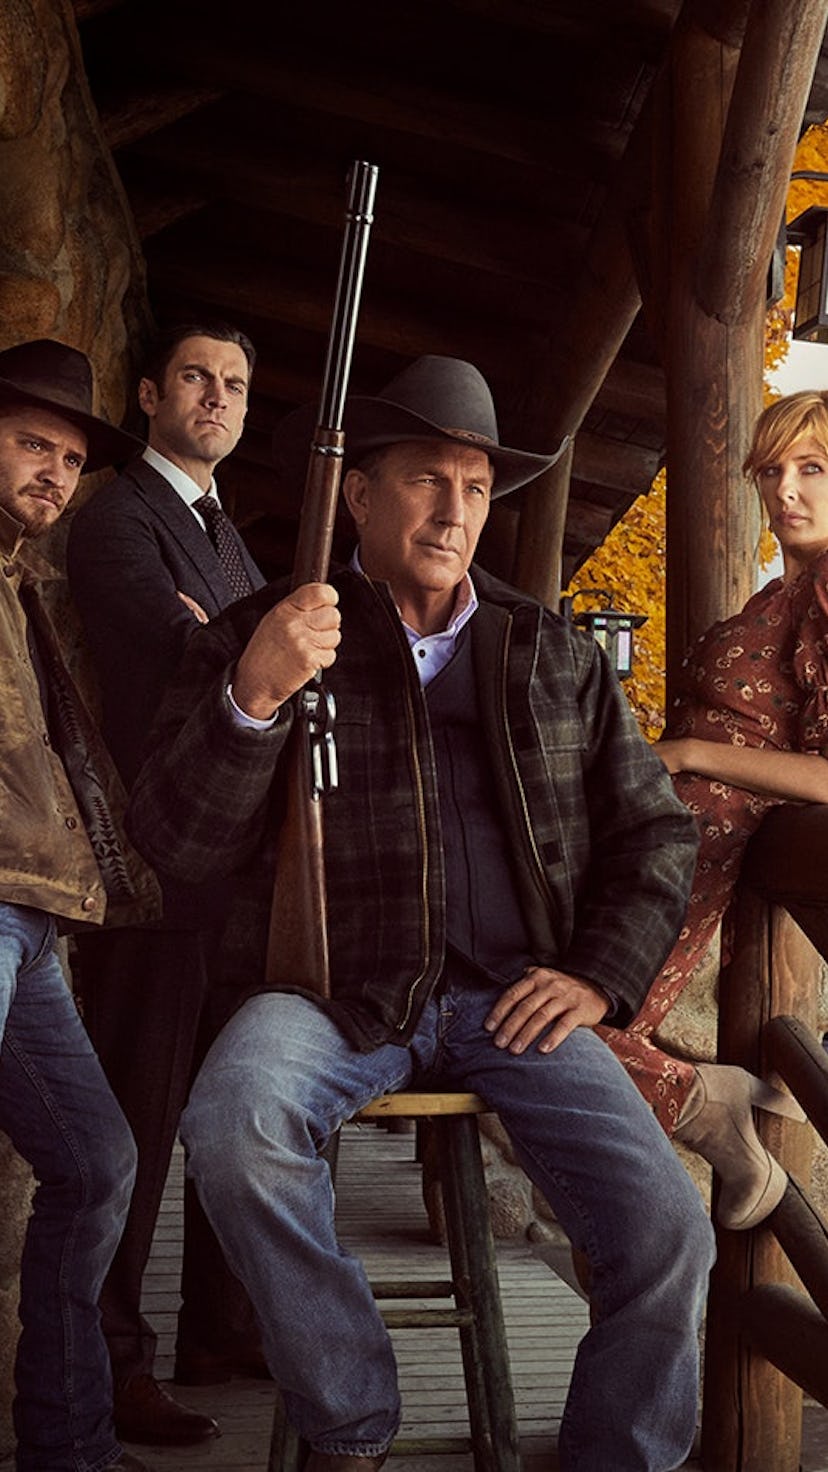 The cast of 'Yellowstone' on Paramount+.